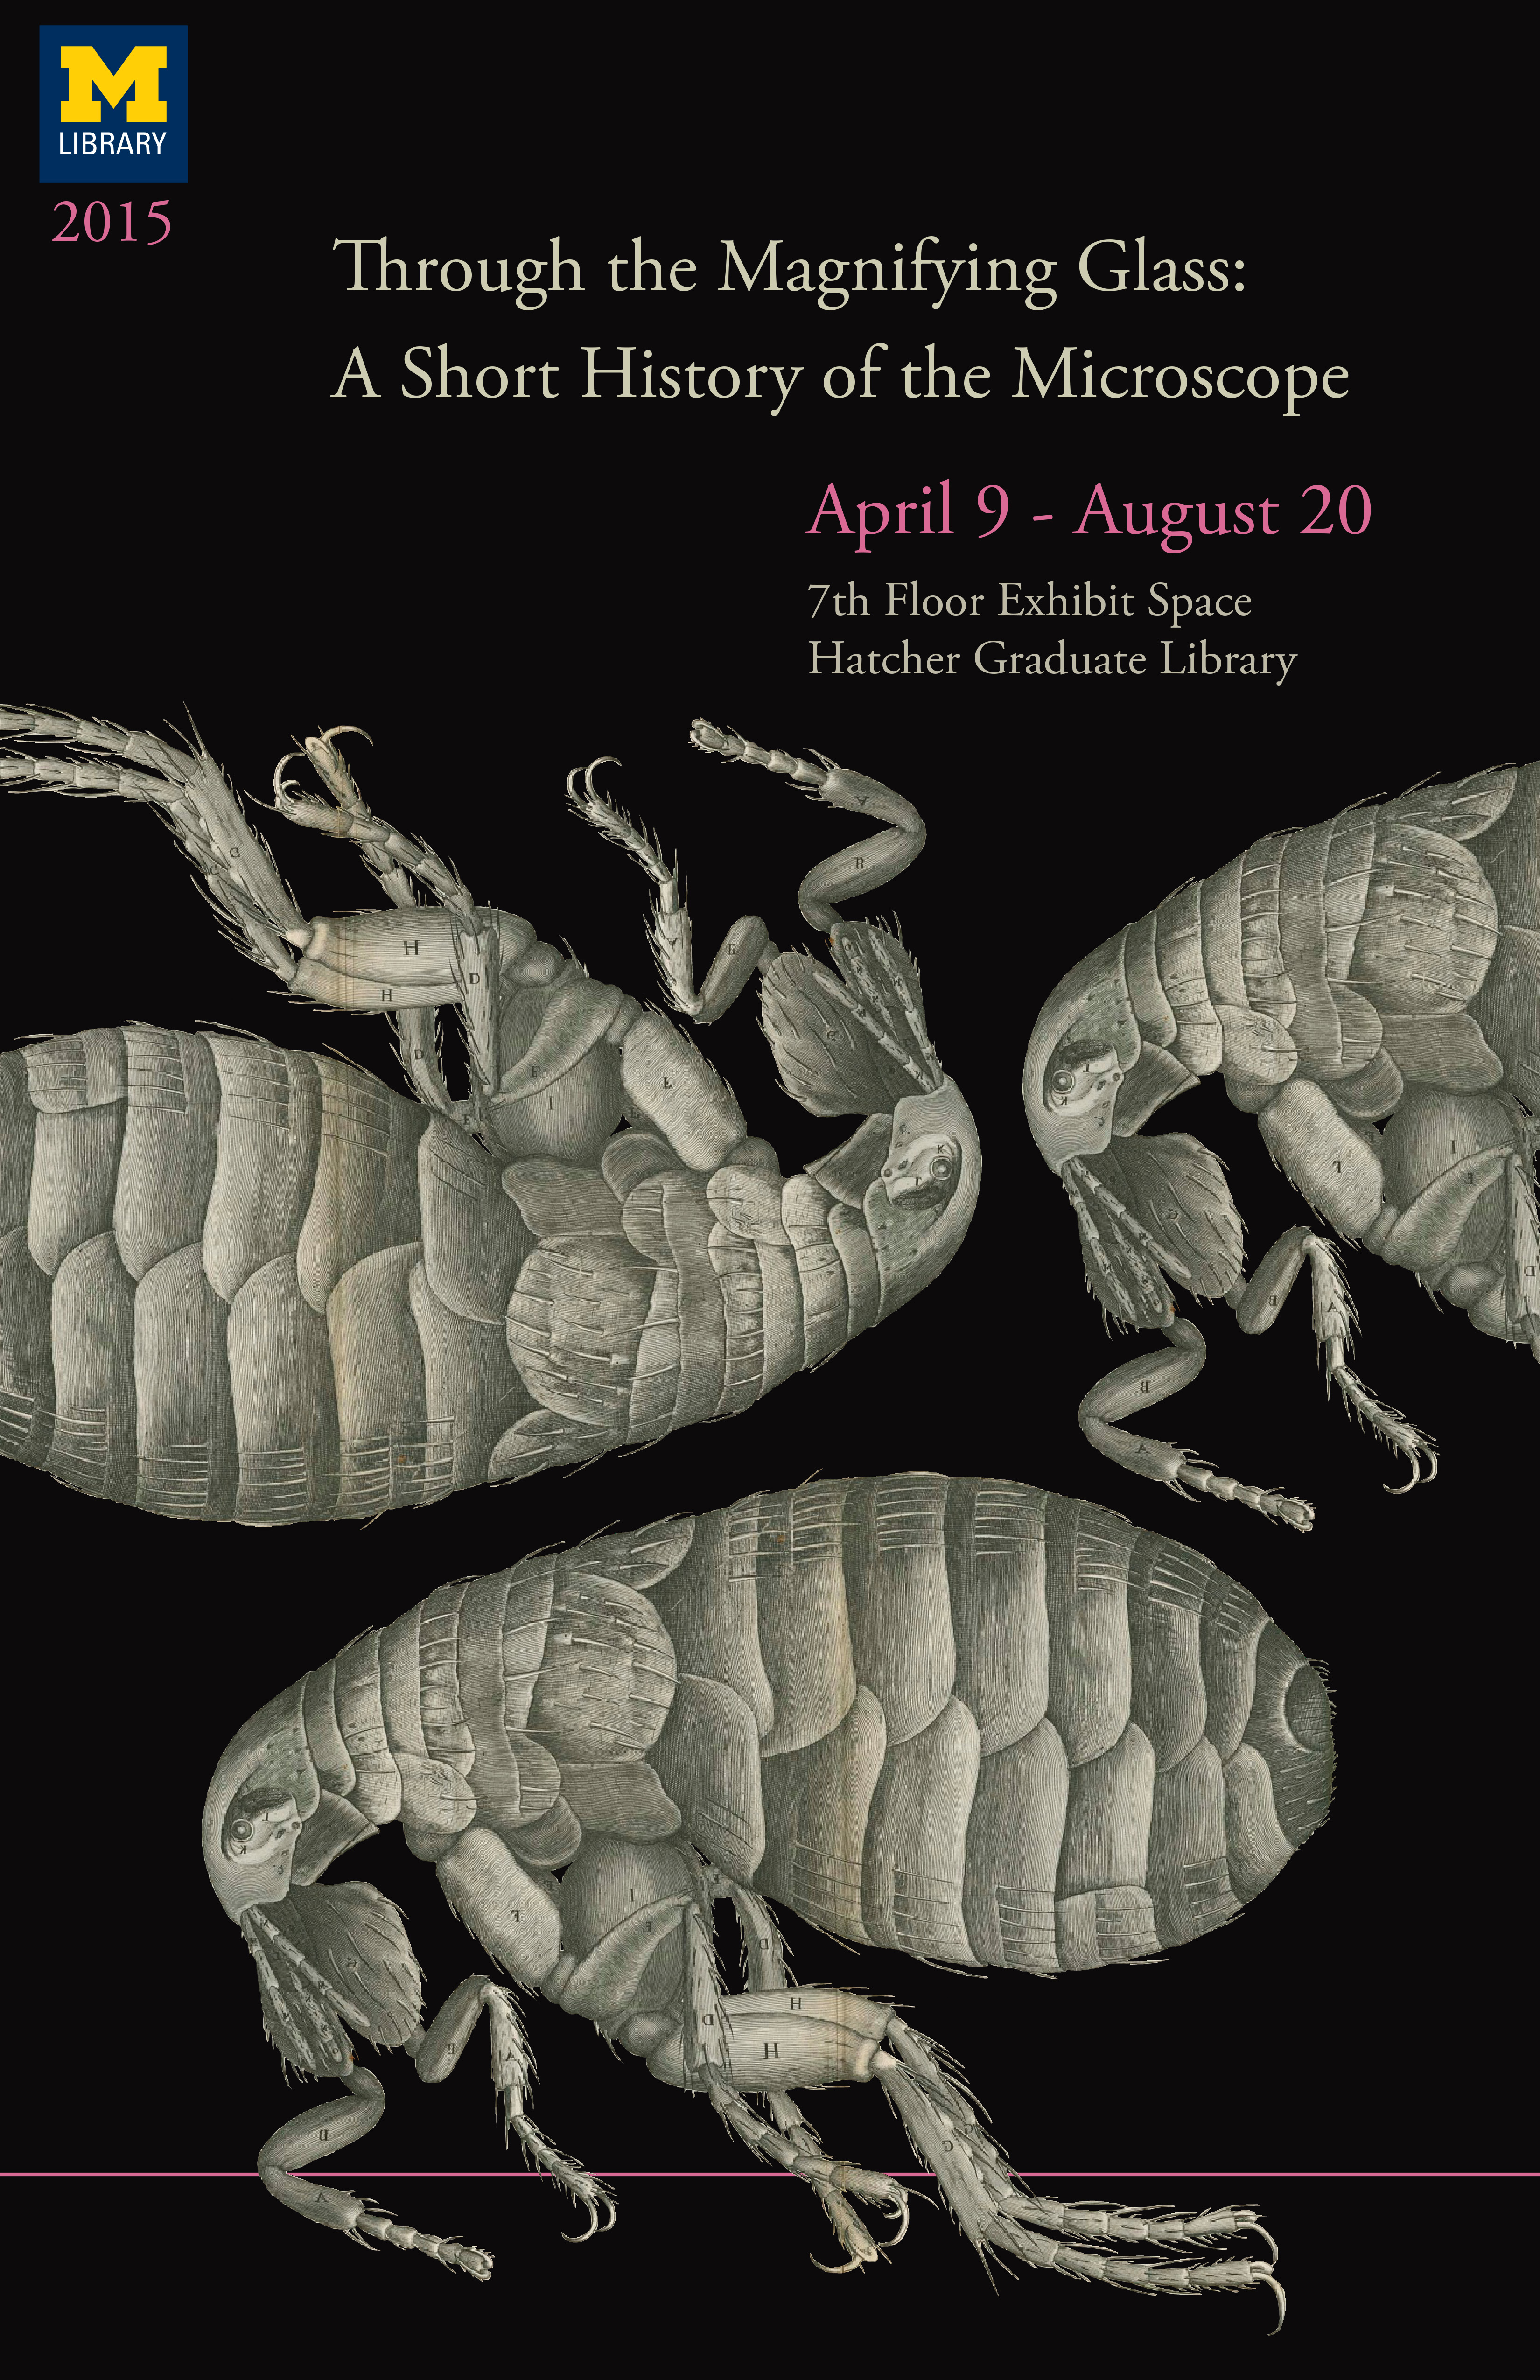 Exhibit Poster Based on an engraving of a flea from Robert Hooke's Micrographia